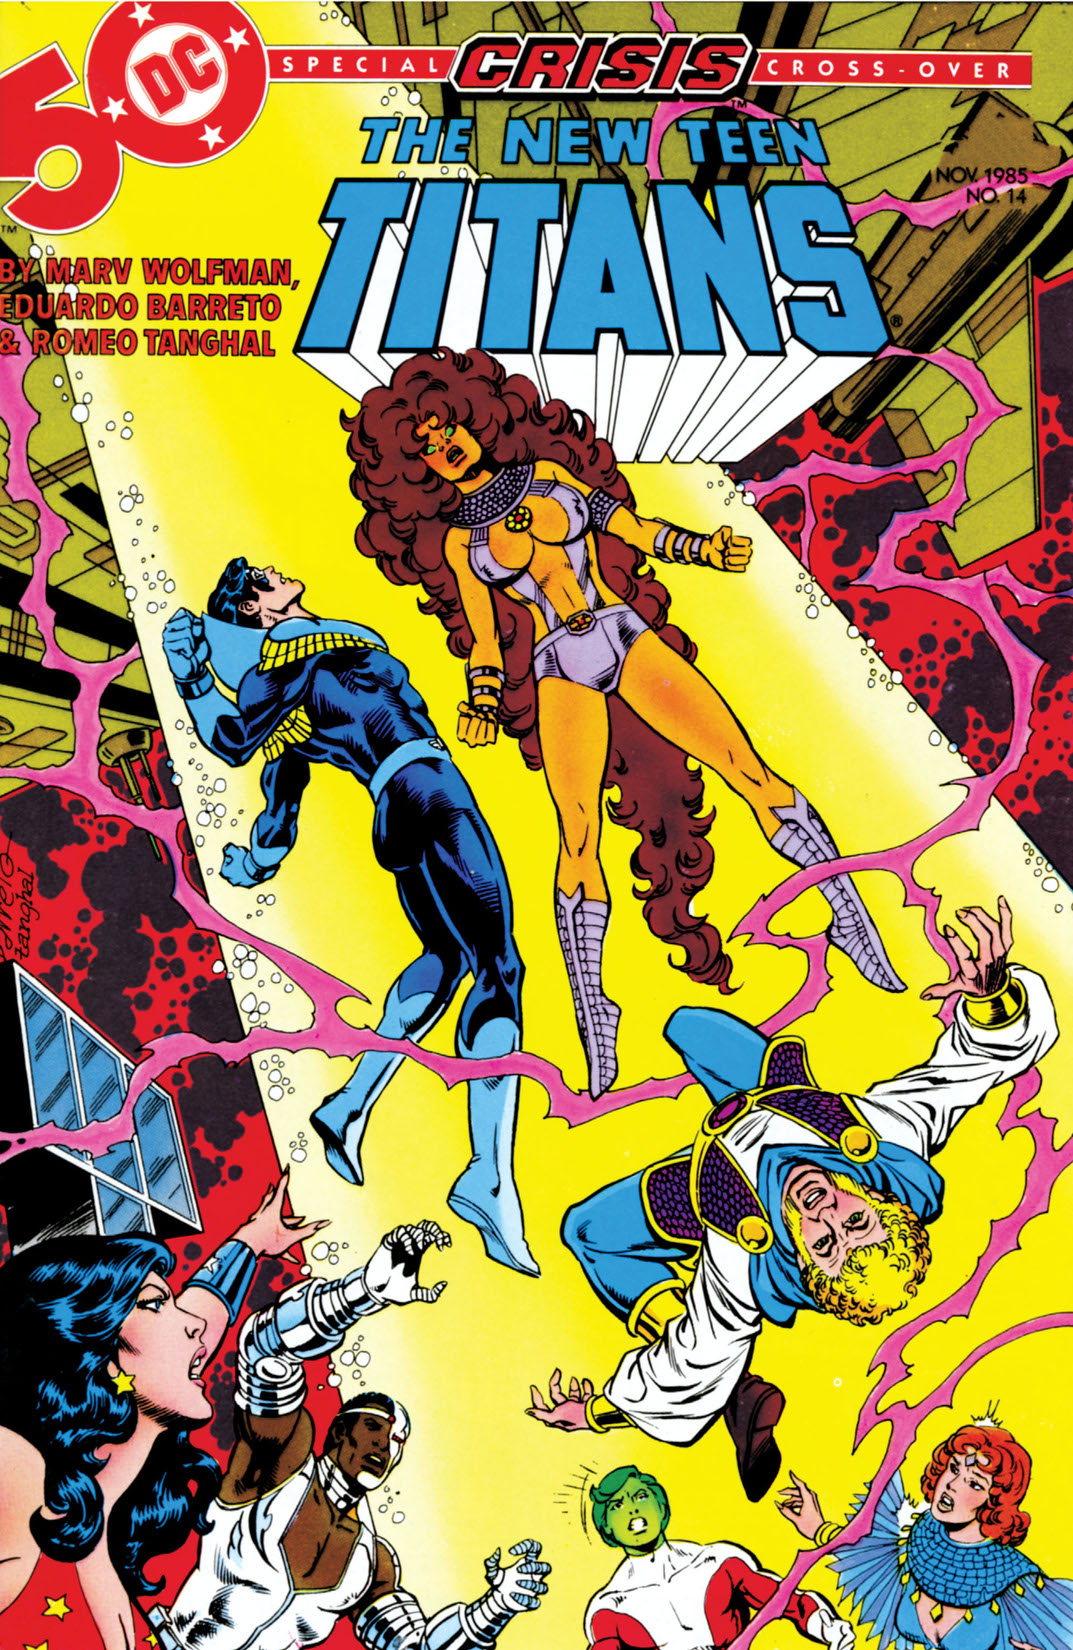 The New Teen Titans #14 preview images